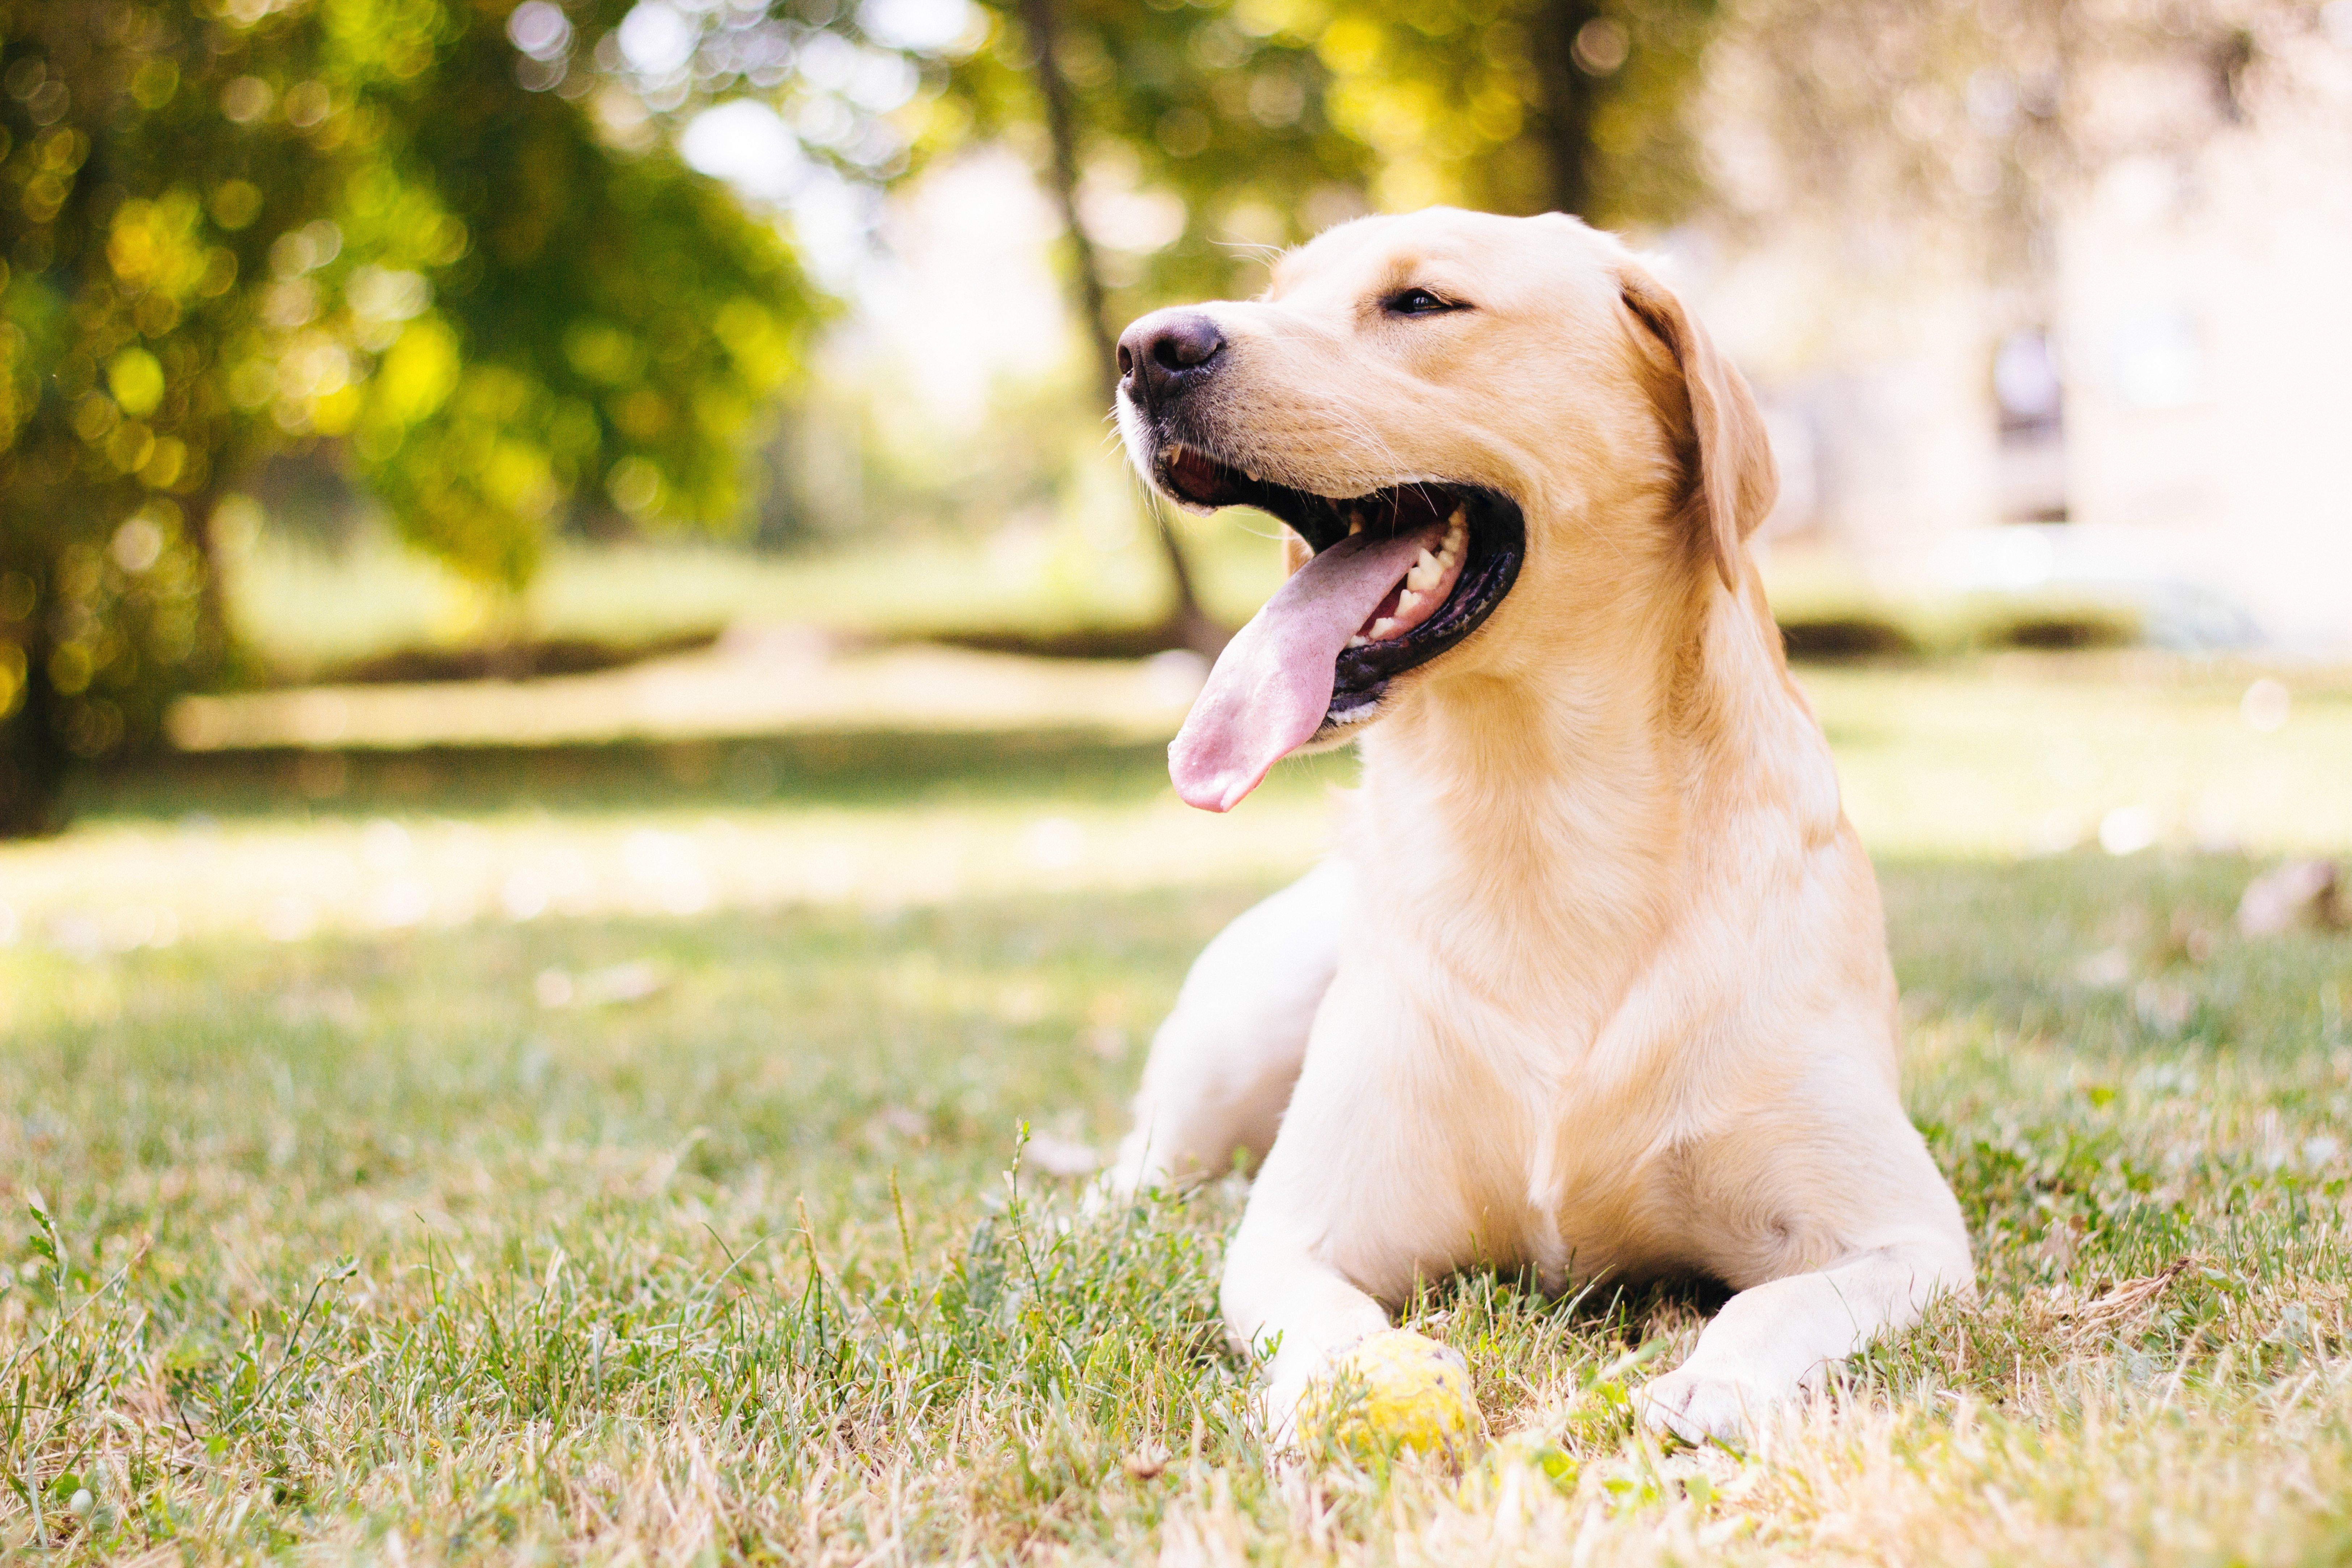 How Do You Keep Pets Safe in Summer Heat?